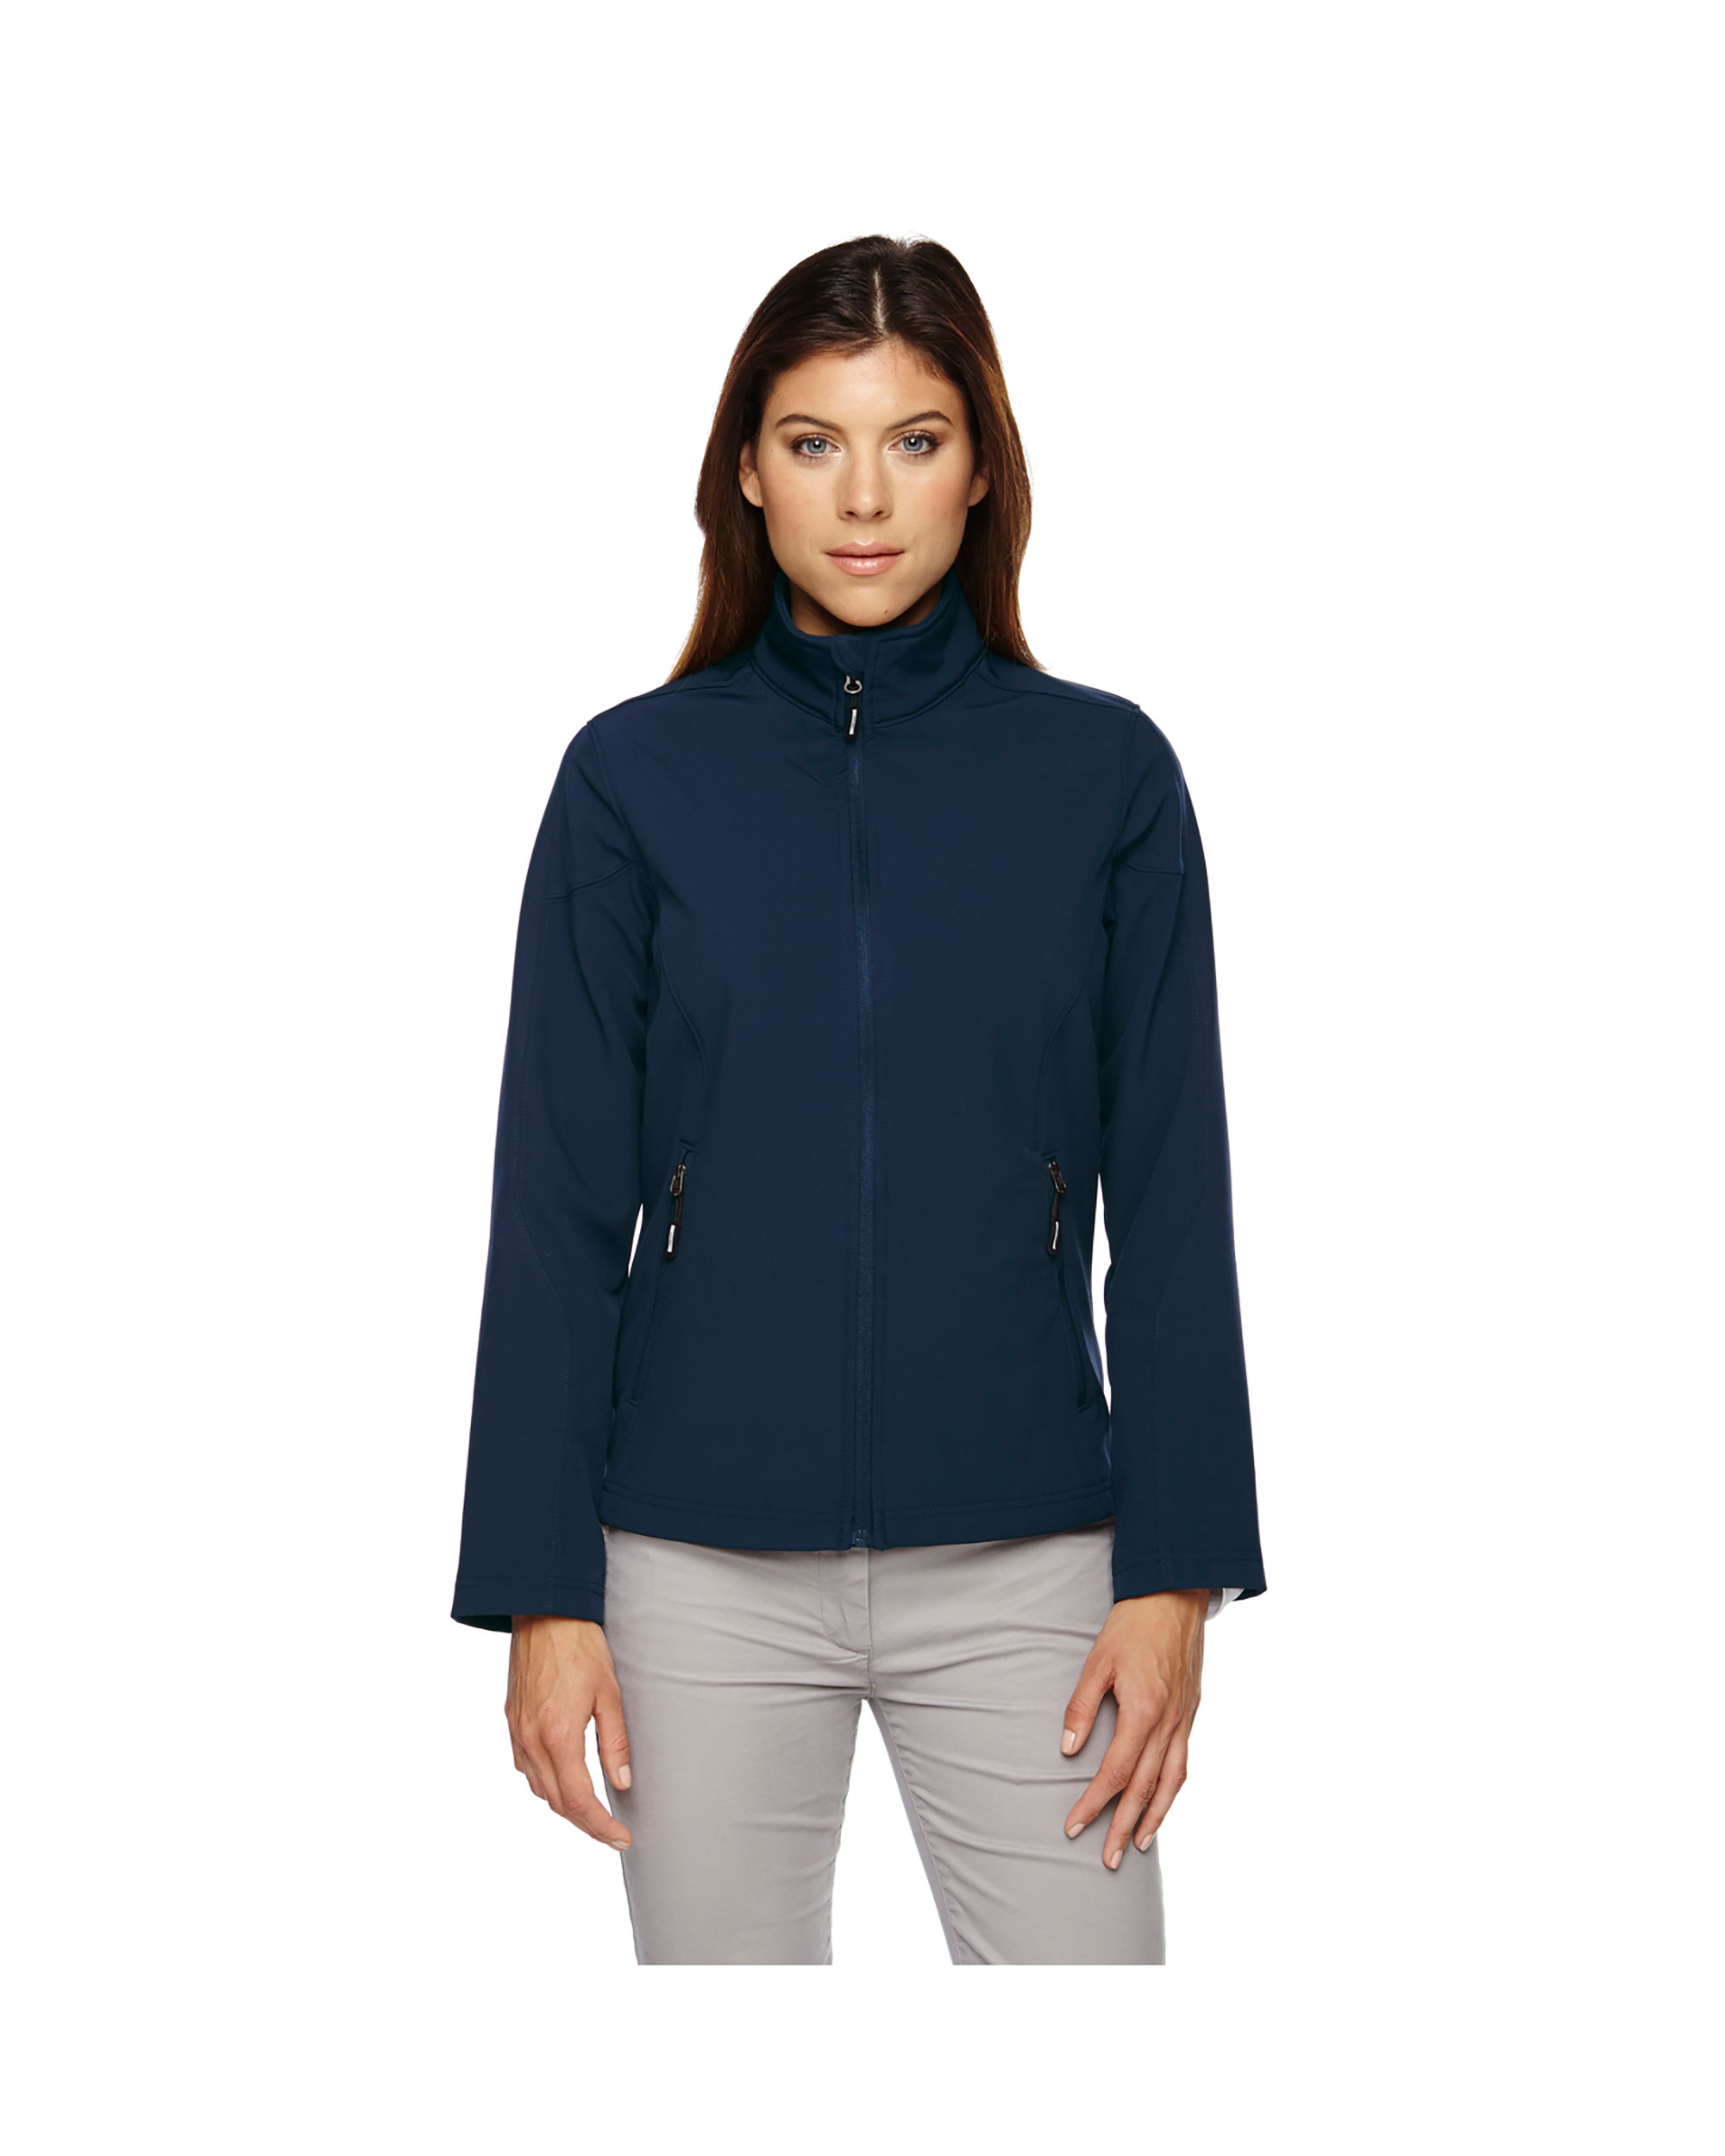 North End Ladies Cruise Two-Layer Fleece Bonded Shell Jacket, Style 78184 - image 1 of 1